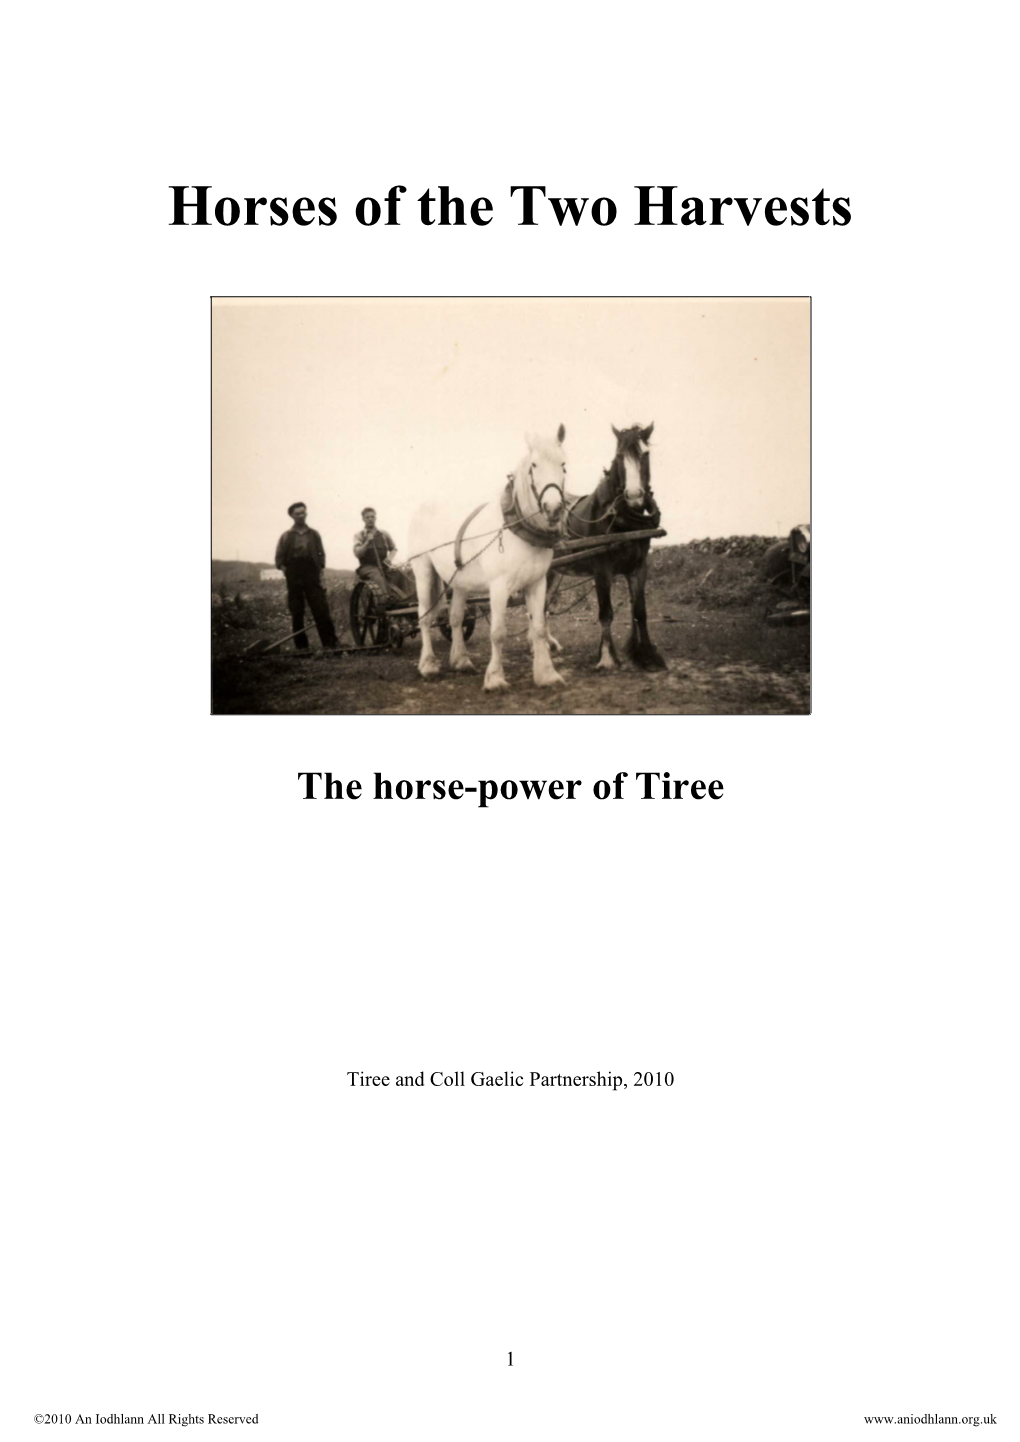 Horses of the Two Harvests